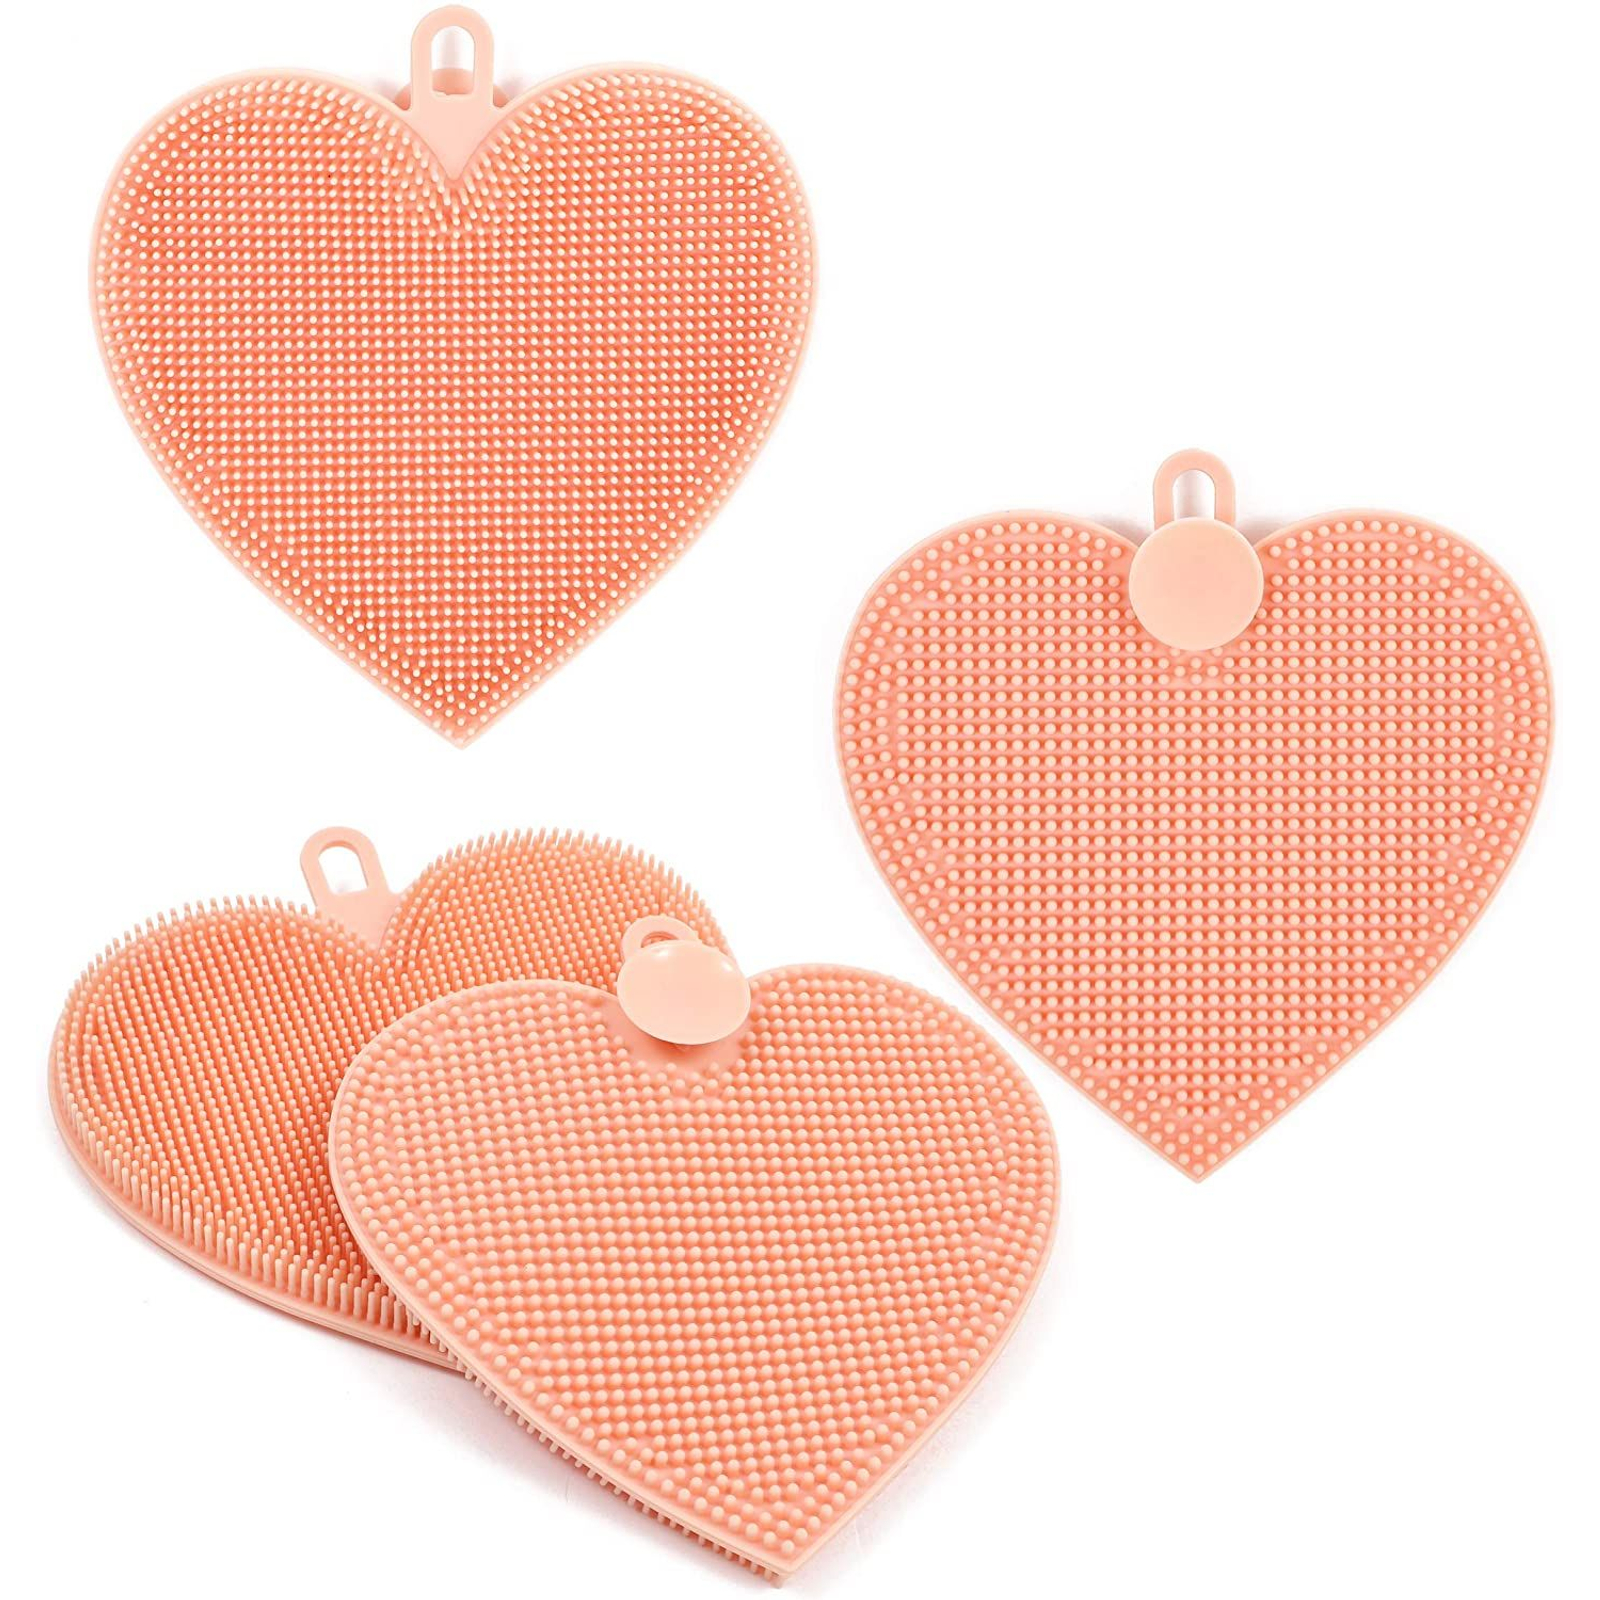 Juvale Silicone 4-Pack Pink Heart Kitchen Sponge, 4.8 X 5